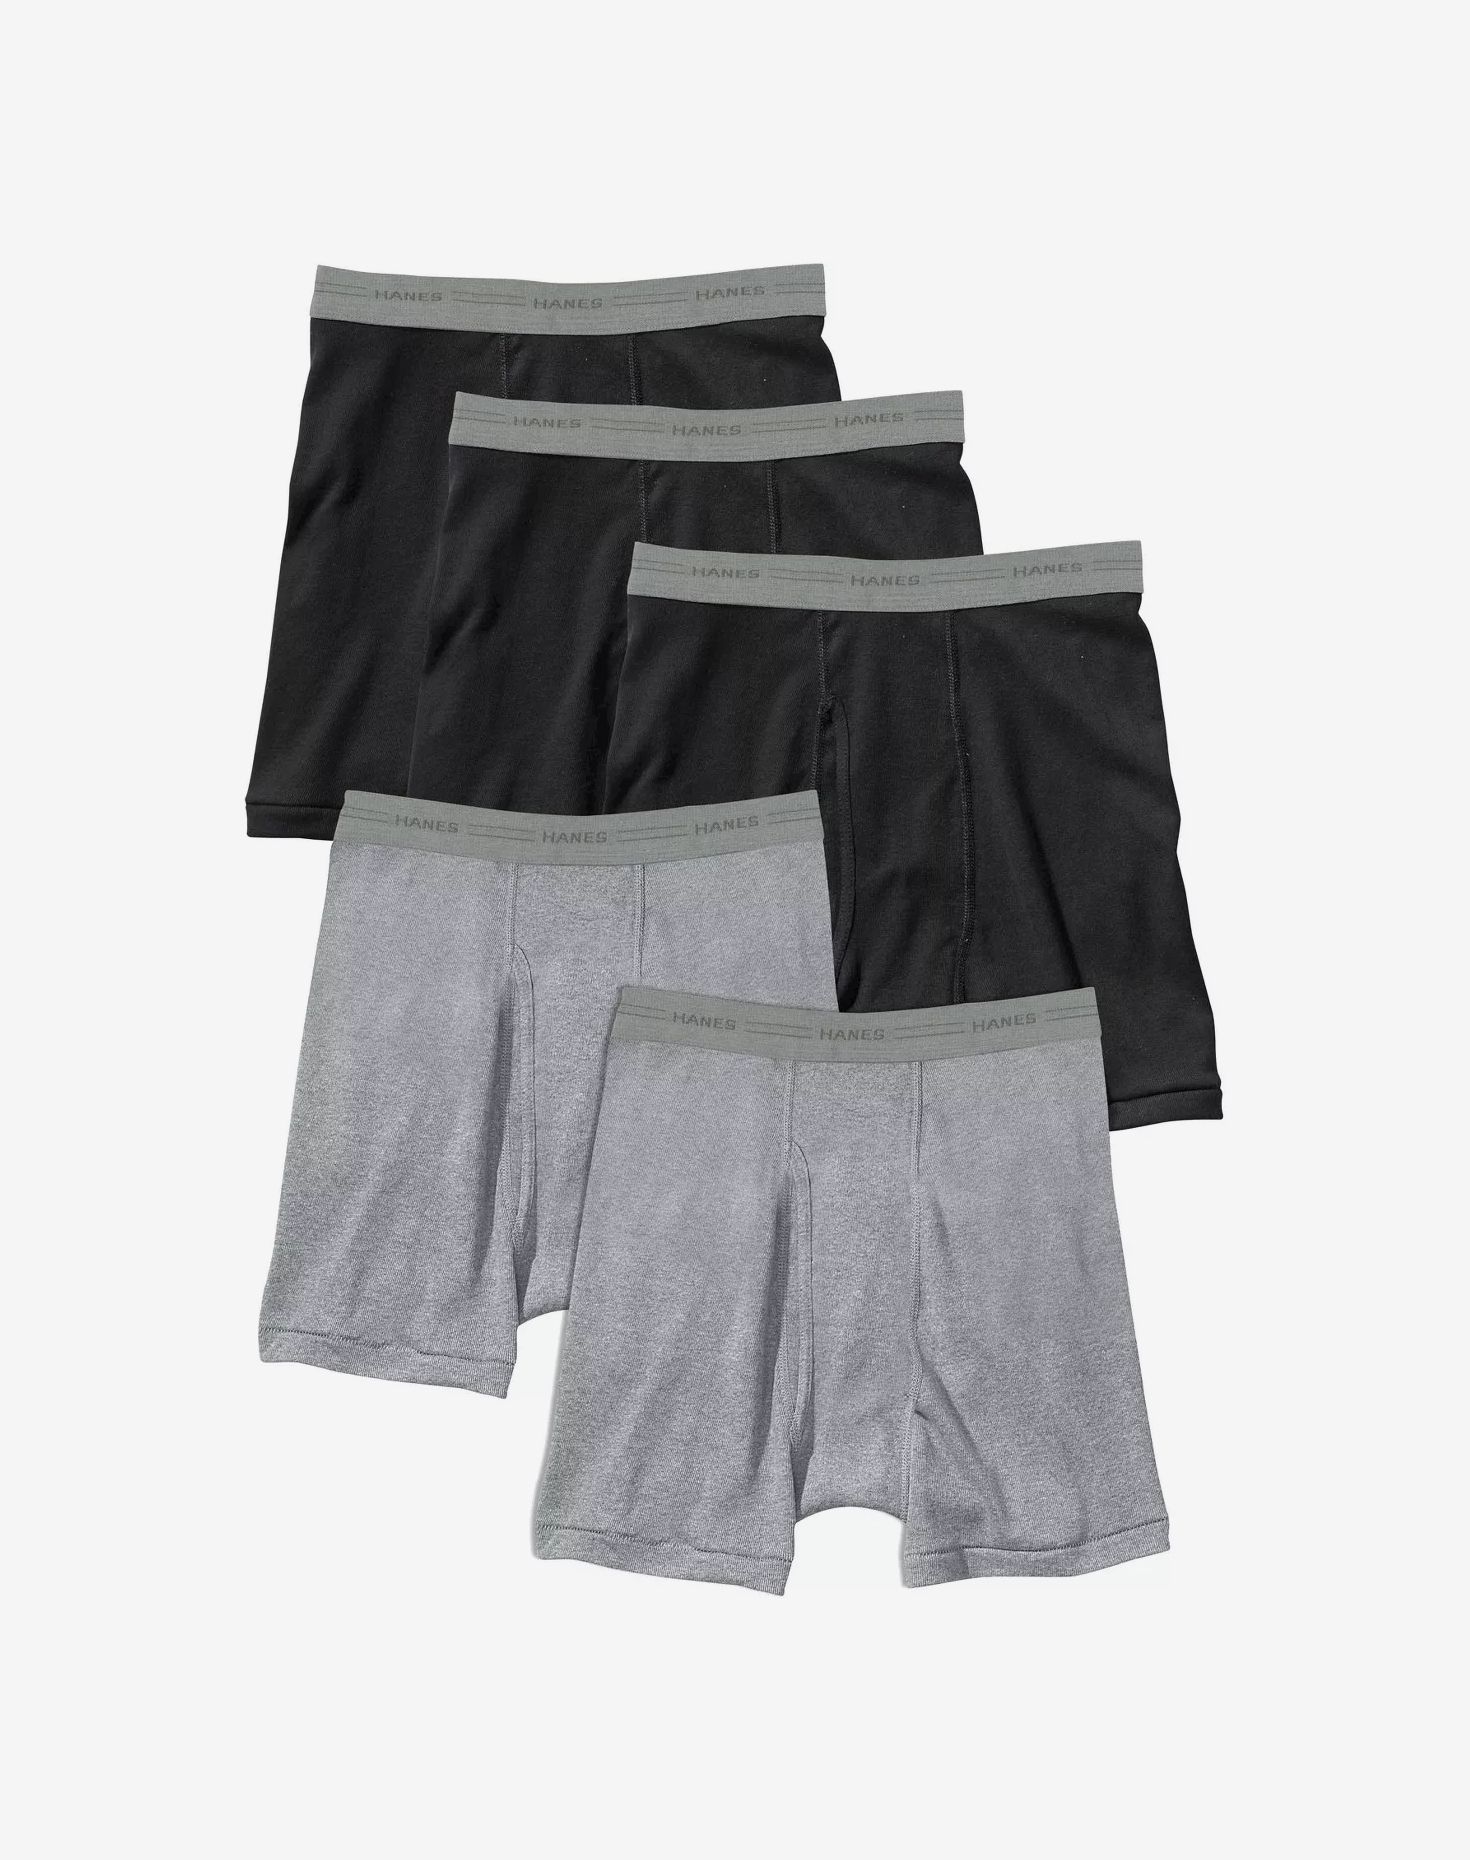 Men's underwear boxers and trunks